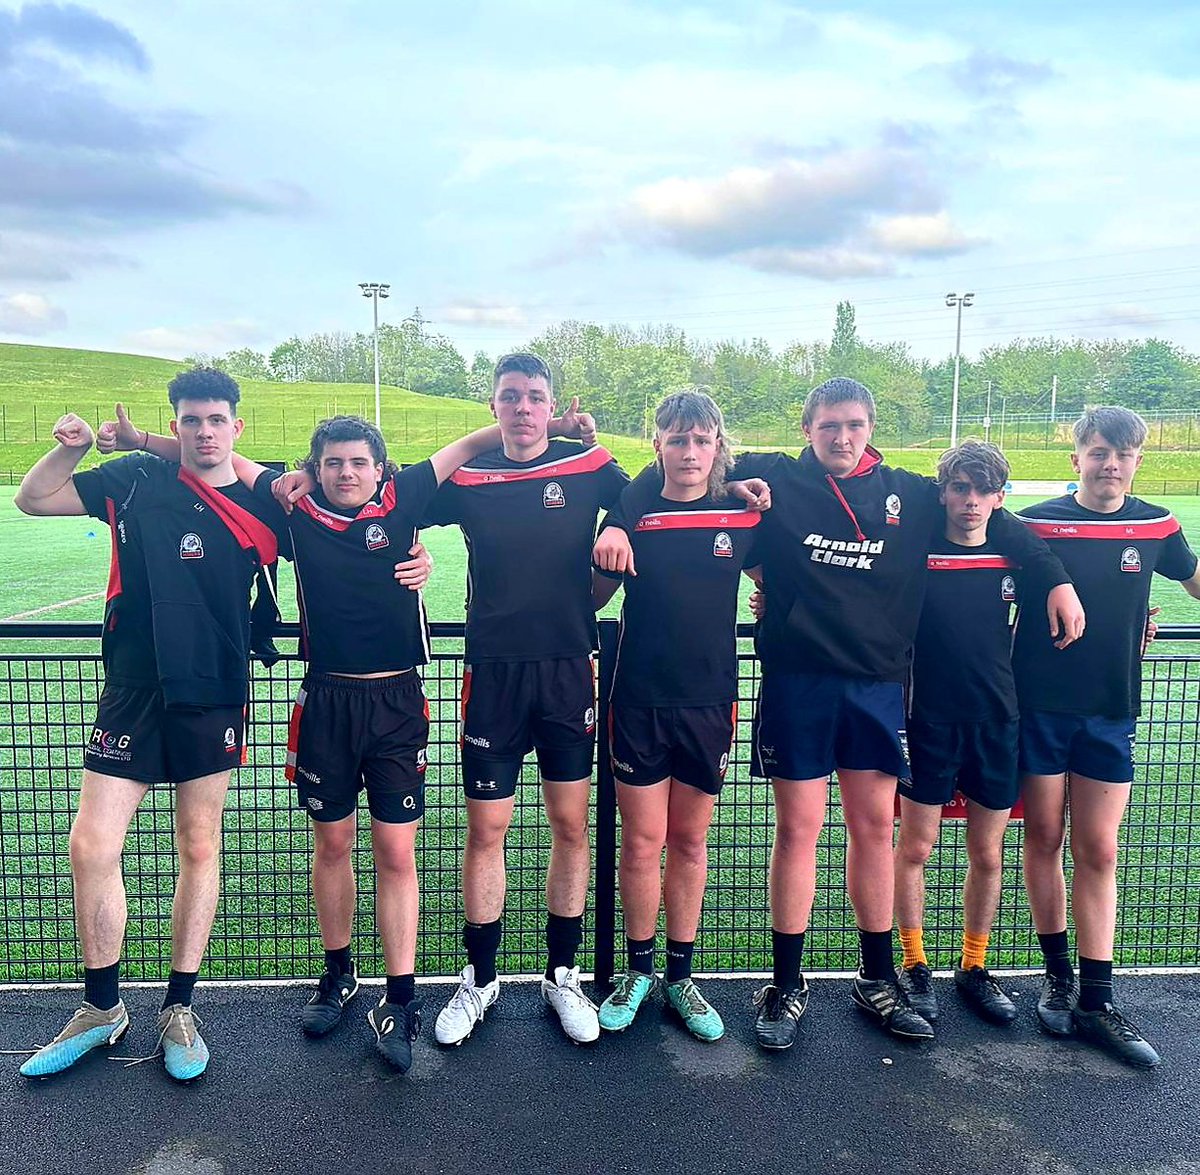 Brilliant to see 7 of our Under 16 Miners selected for the @SheffieldEagles pathway program at the OLP this week.

This is a new program aimed at the development of young local talent to feed into the Eagles.

#BarnsleyIsBrill #southyorkshirerugbyleague #rugbyfamily #Sheffield